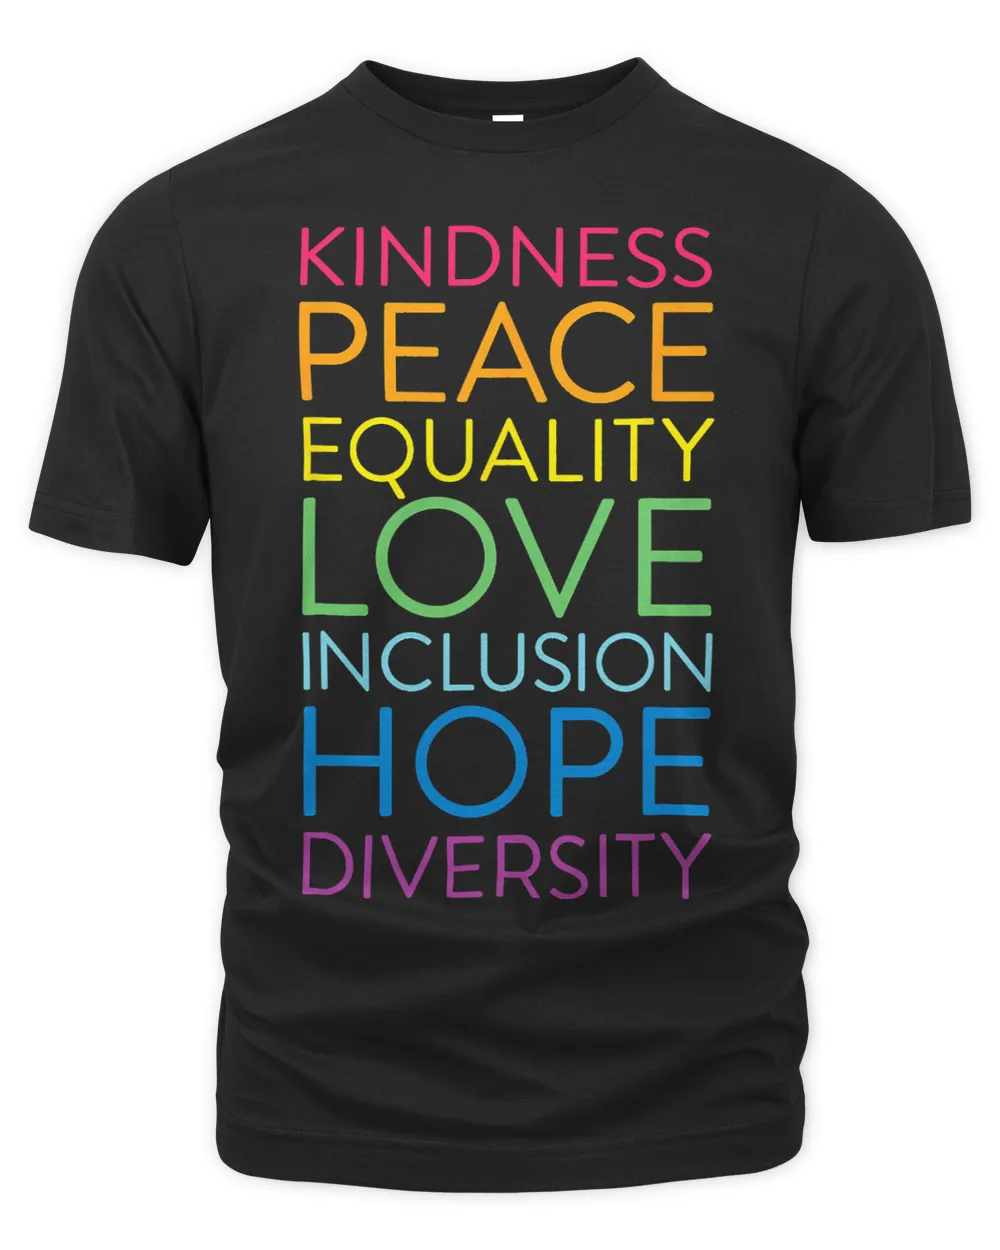 Peace Love Inclusion Equality Diversity Human Rights